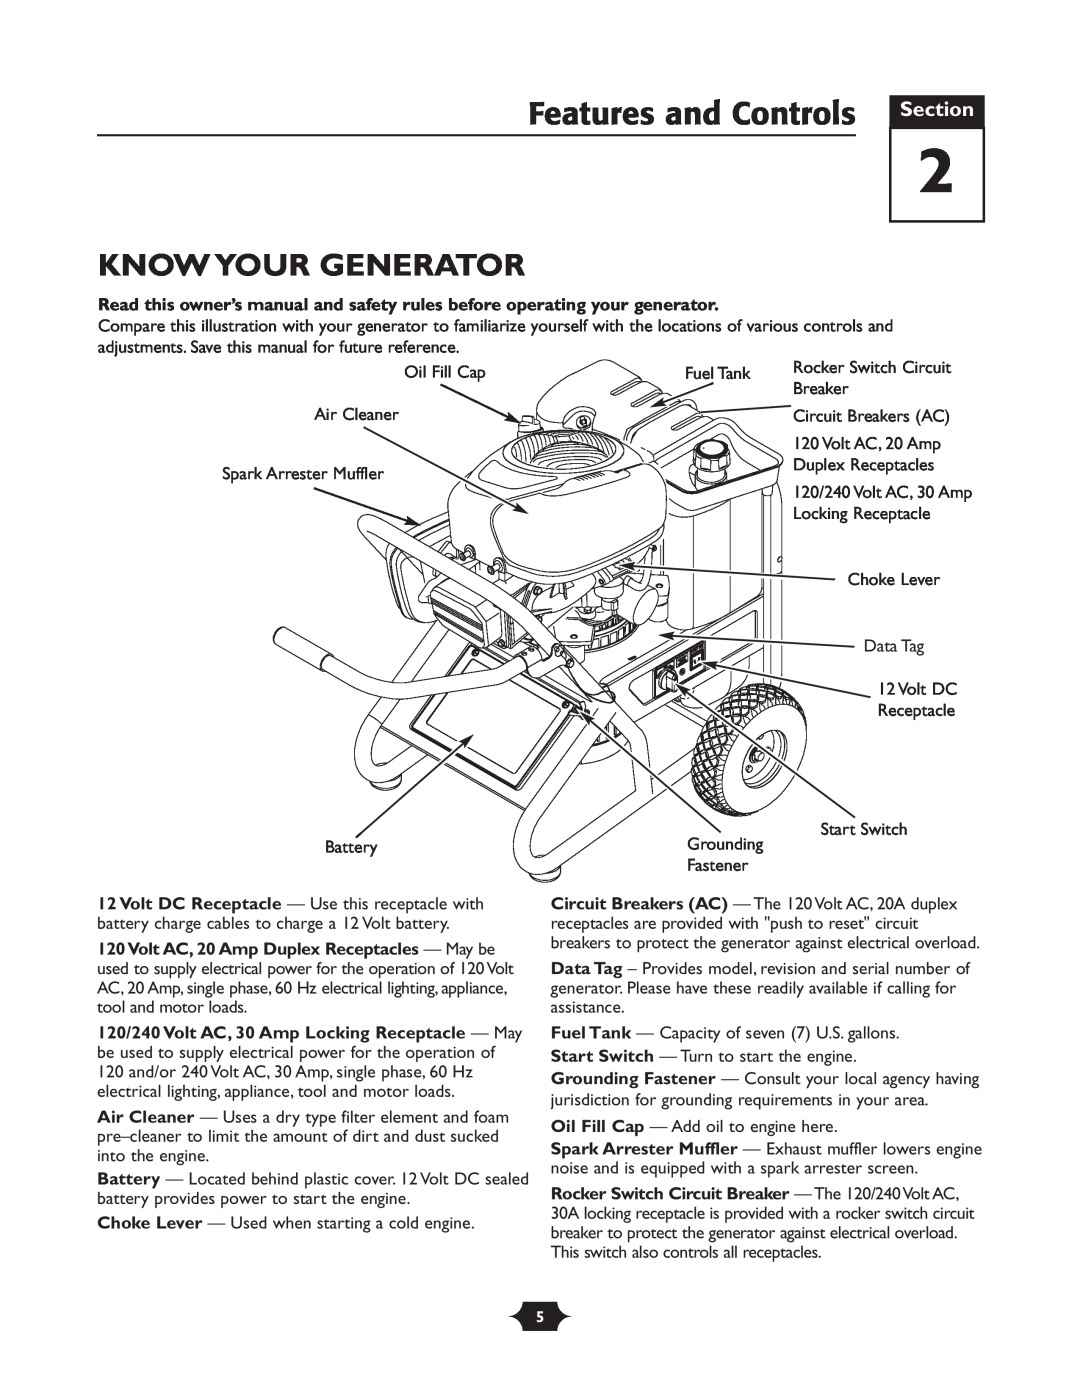 Briggs & Stratton 30237 owner manual Features and Controls Section, Know Your Generator 